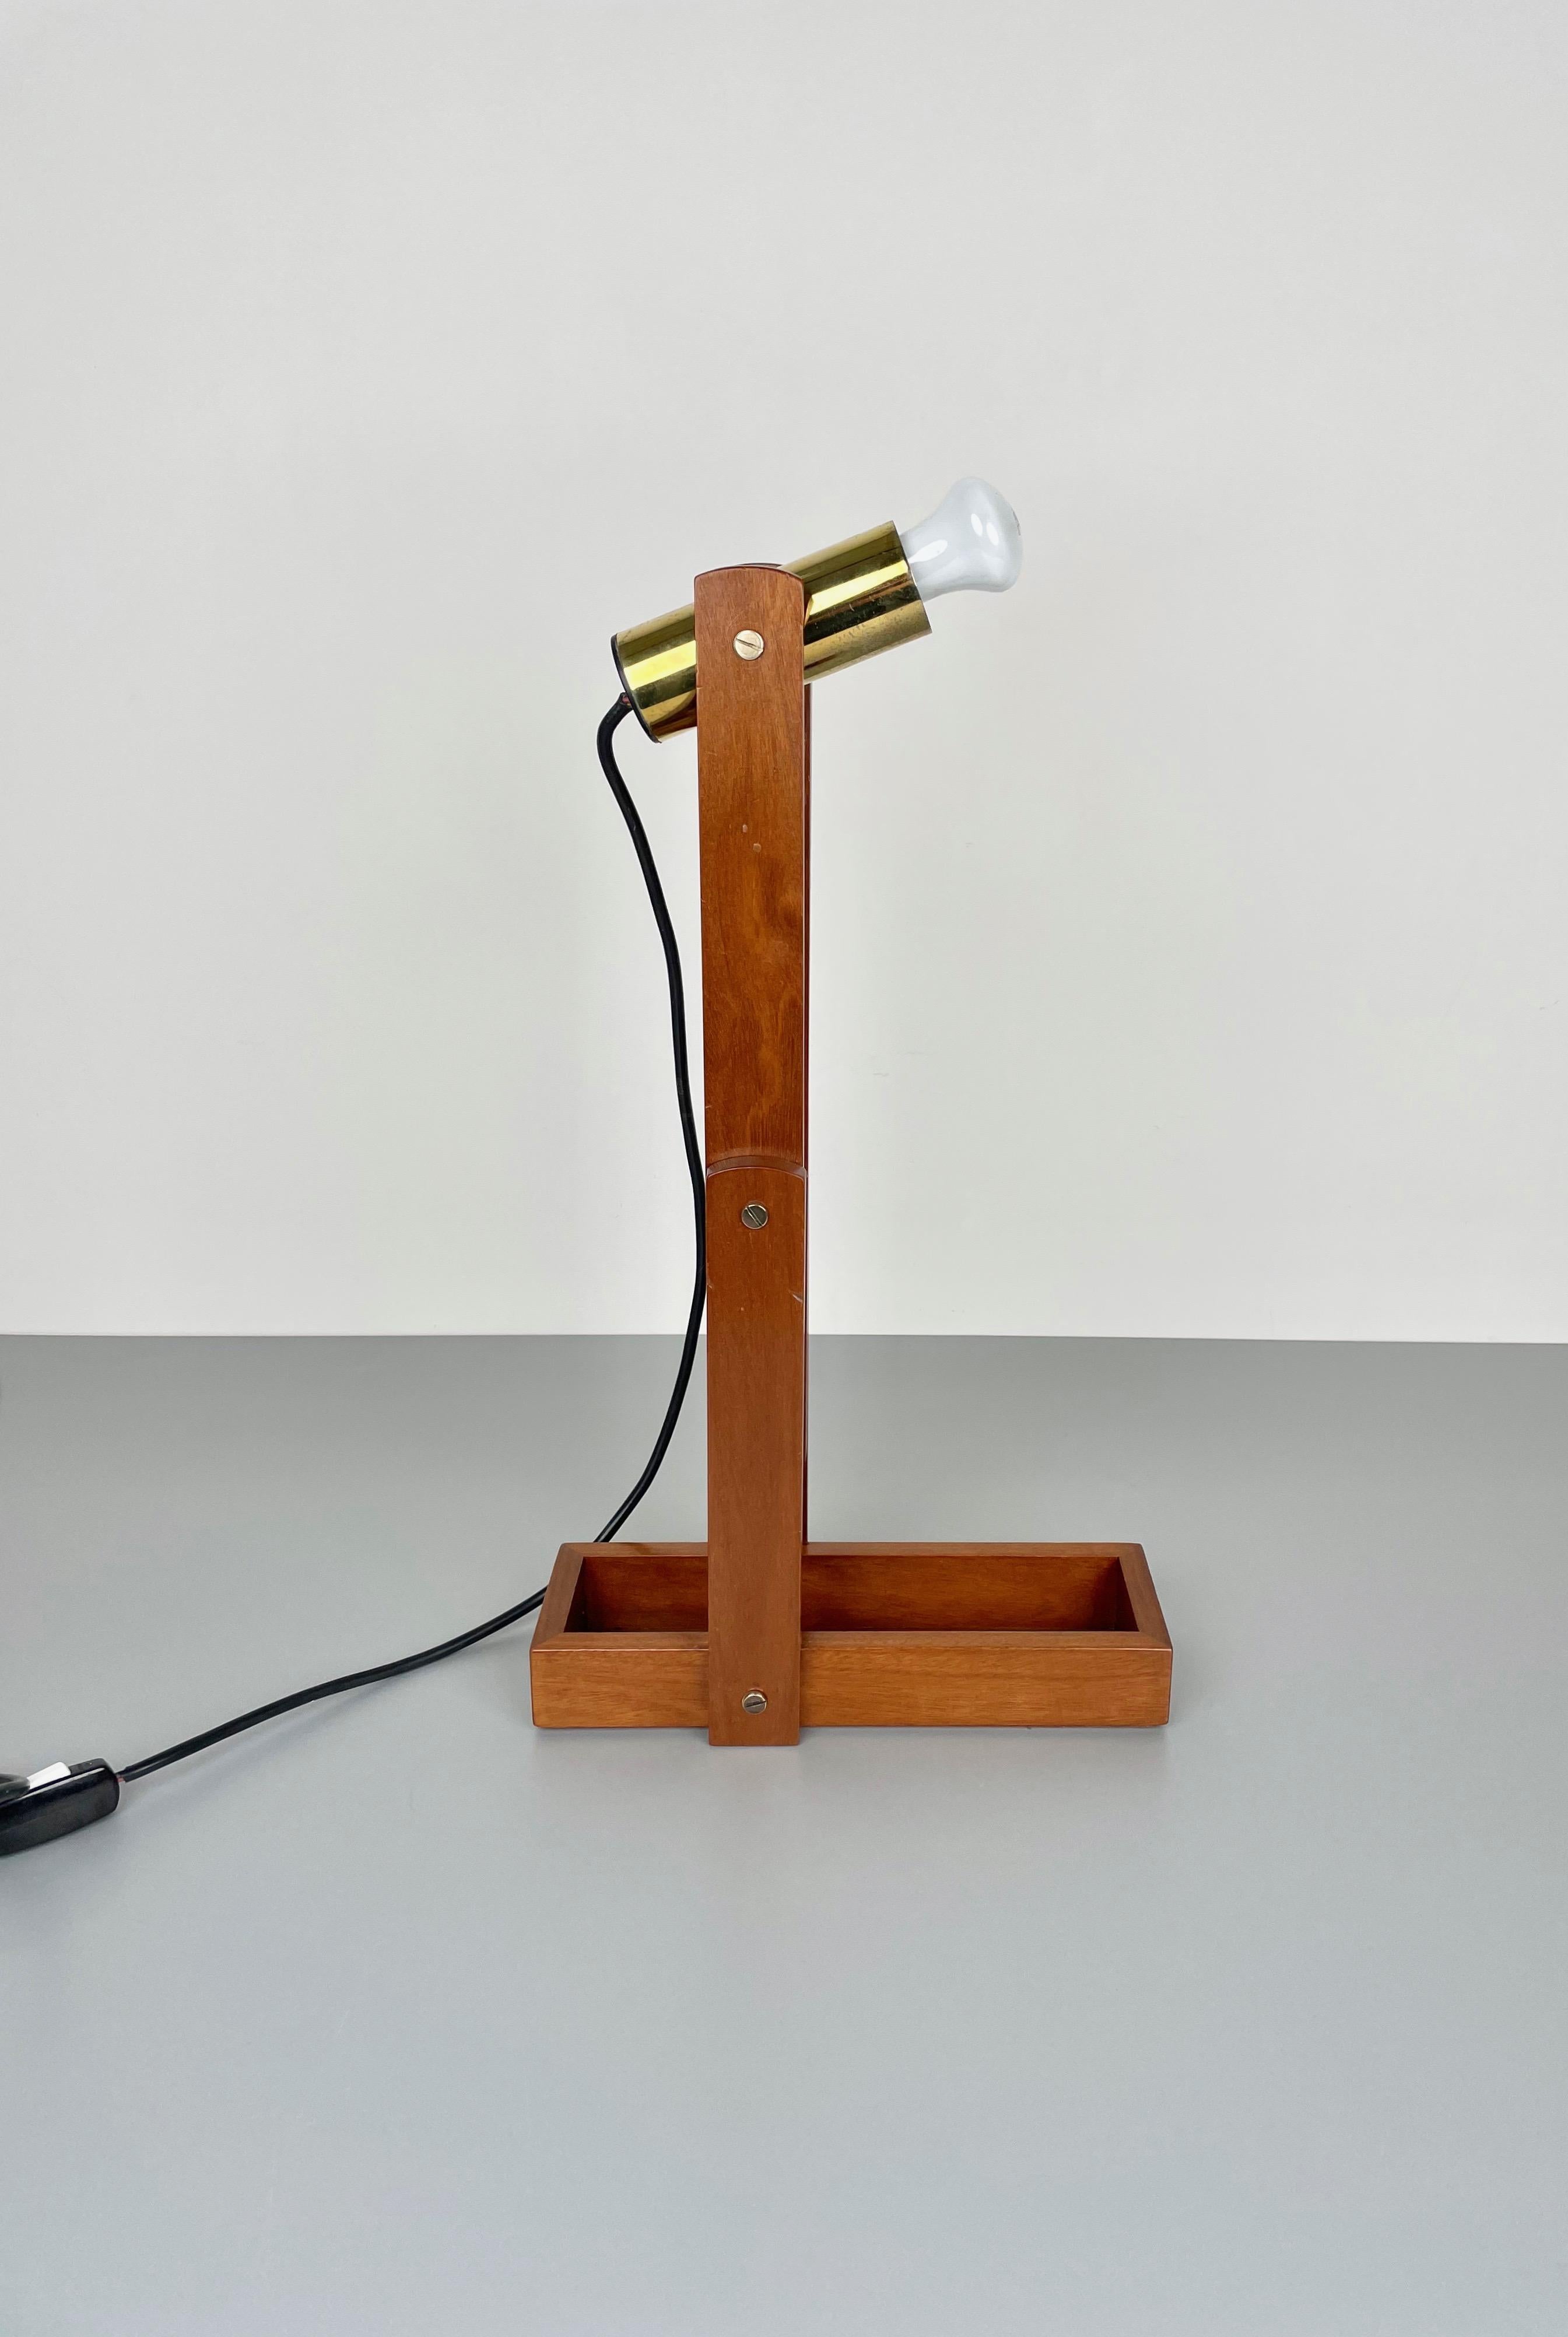 Adjustable Wood & Brass Table Lamp, Italy, 1960s For Sale 5